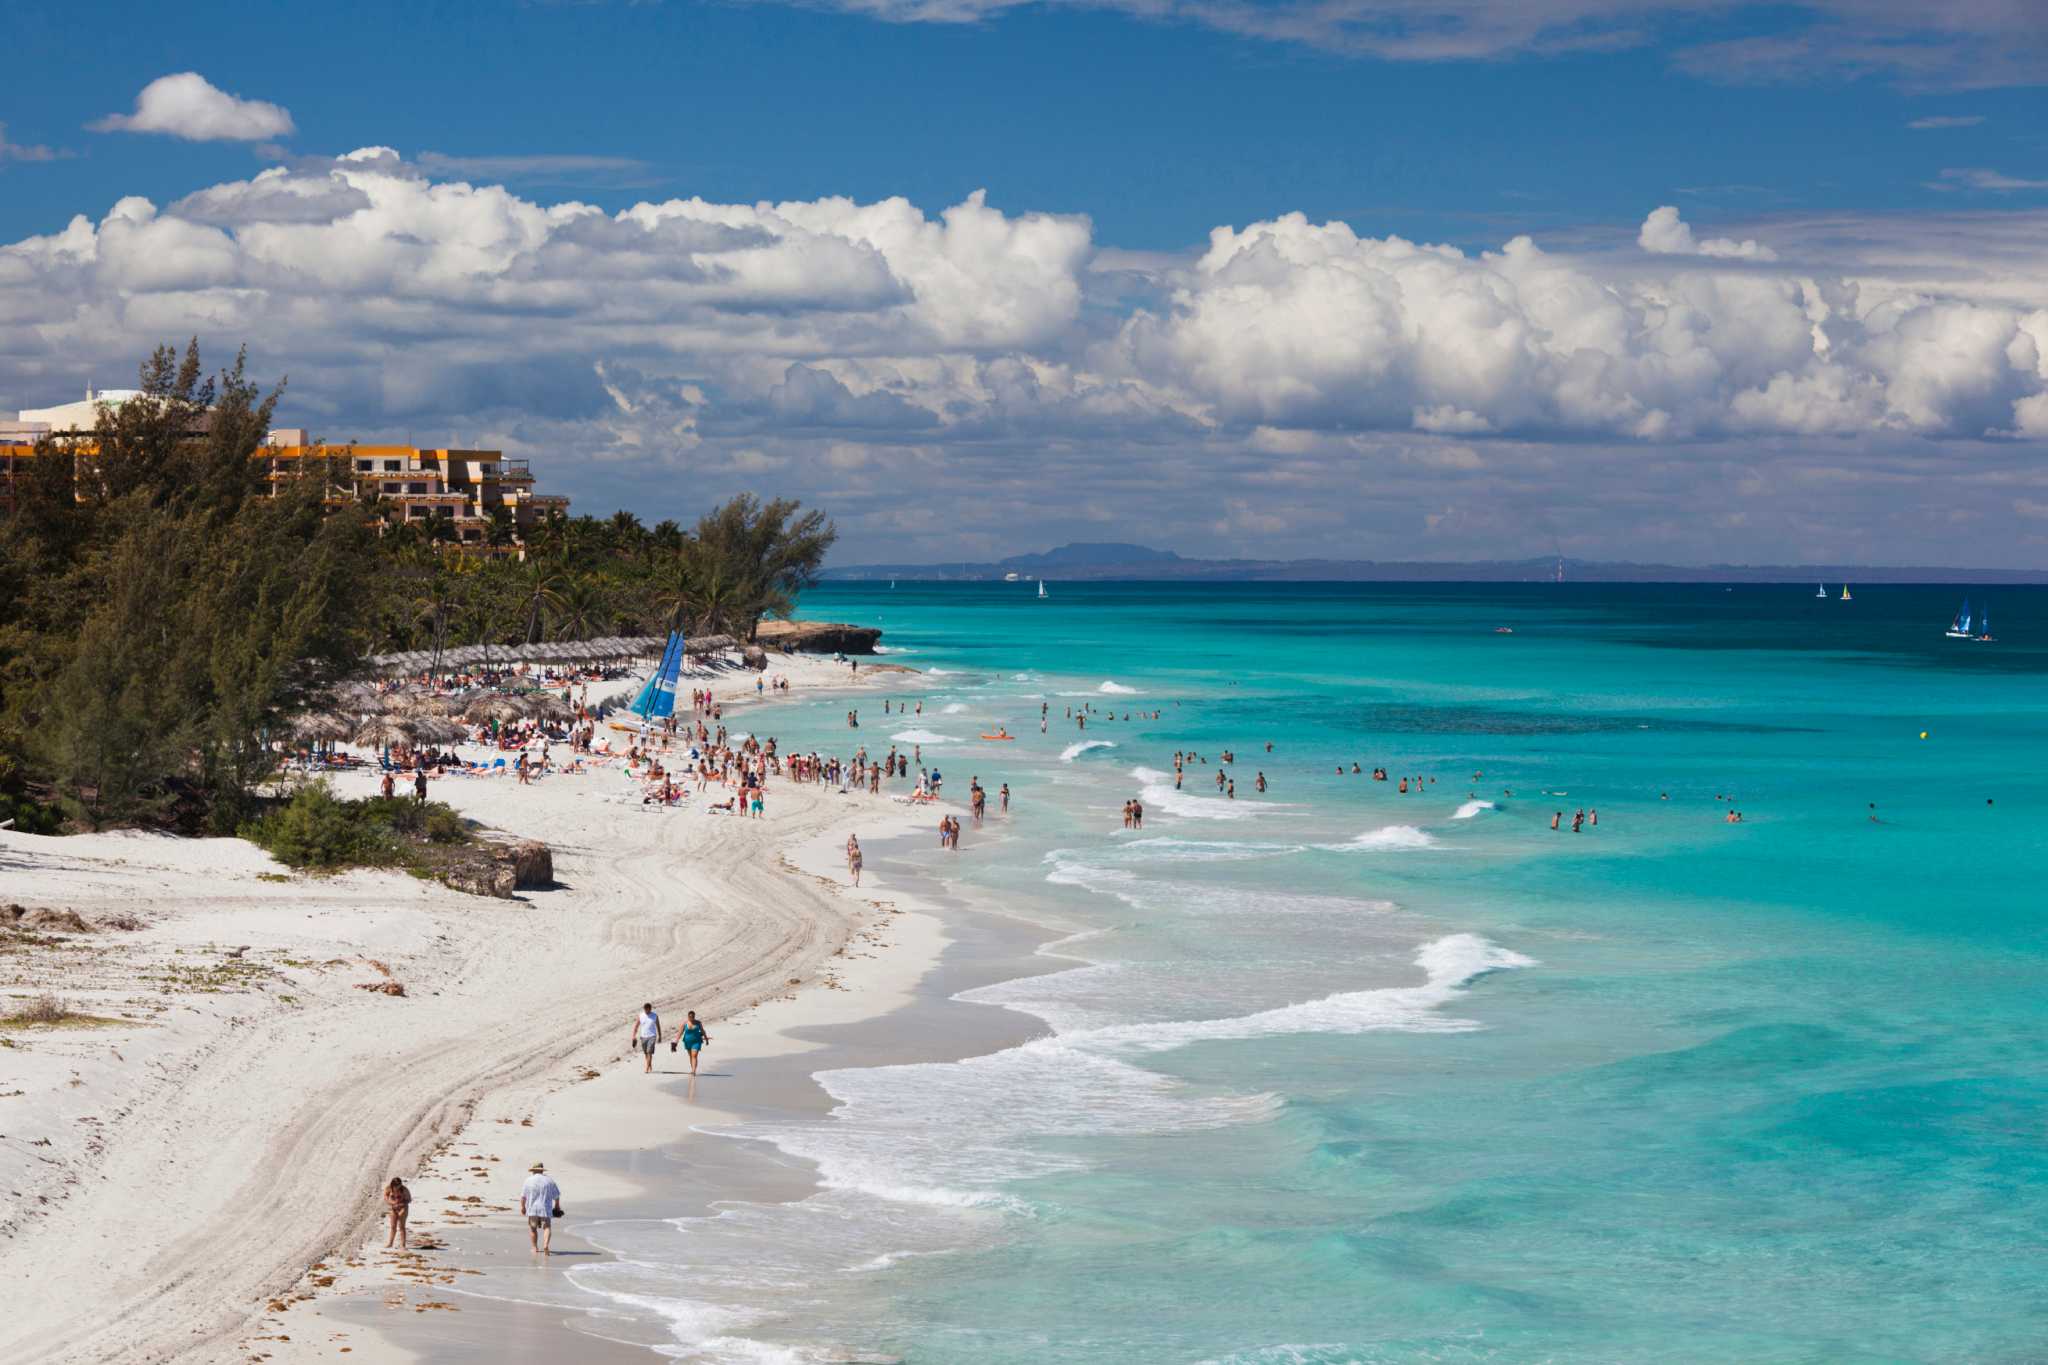 If you're thinking about taking a Mexican beach vacation this fall, th...